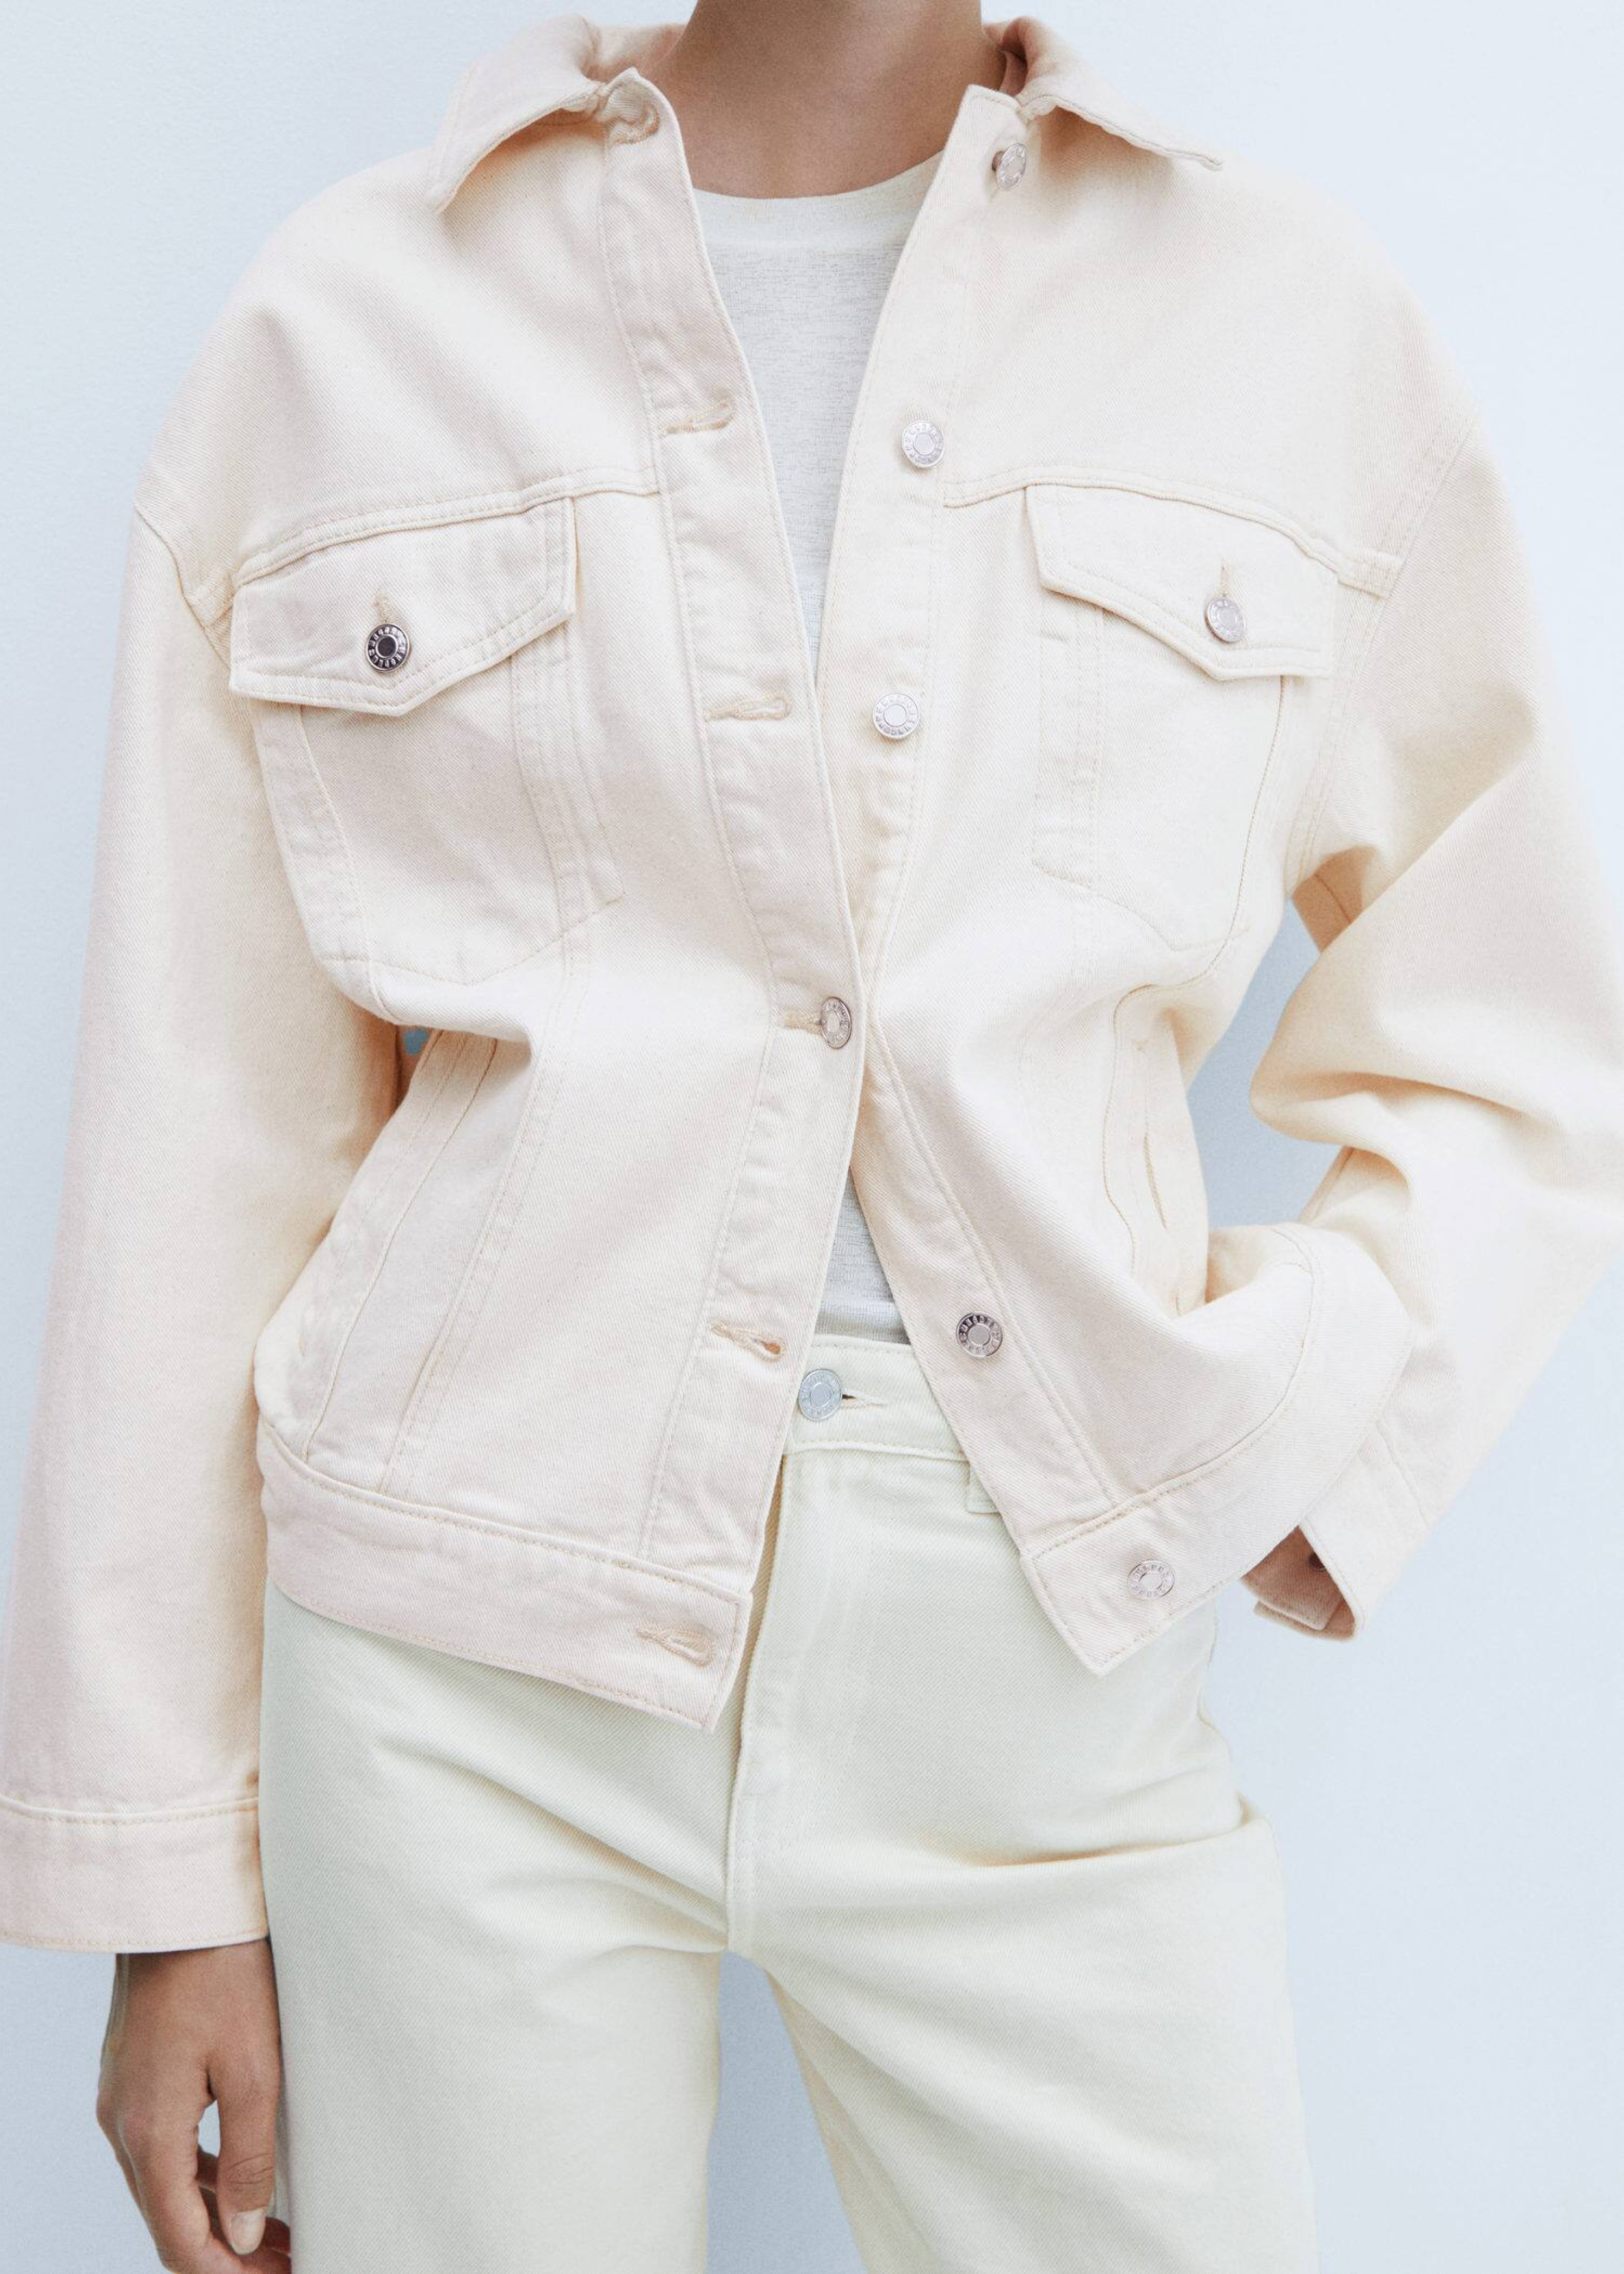 A woman combining jeans with a beige jacket.